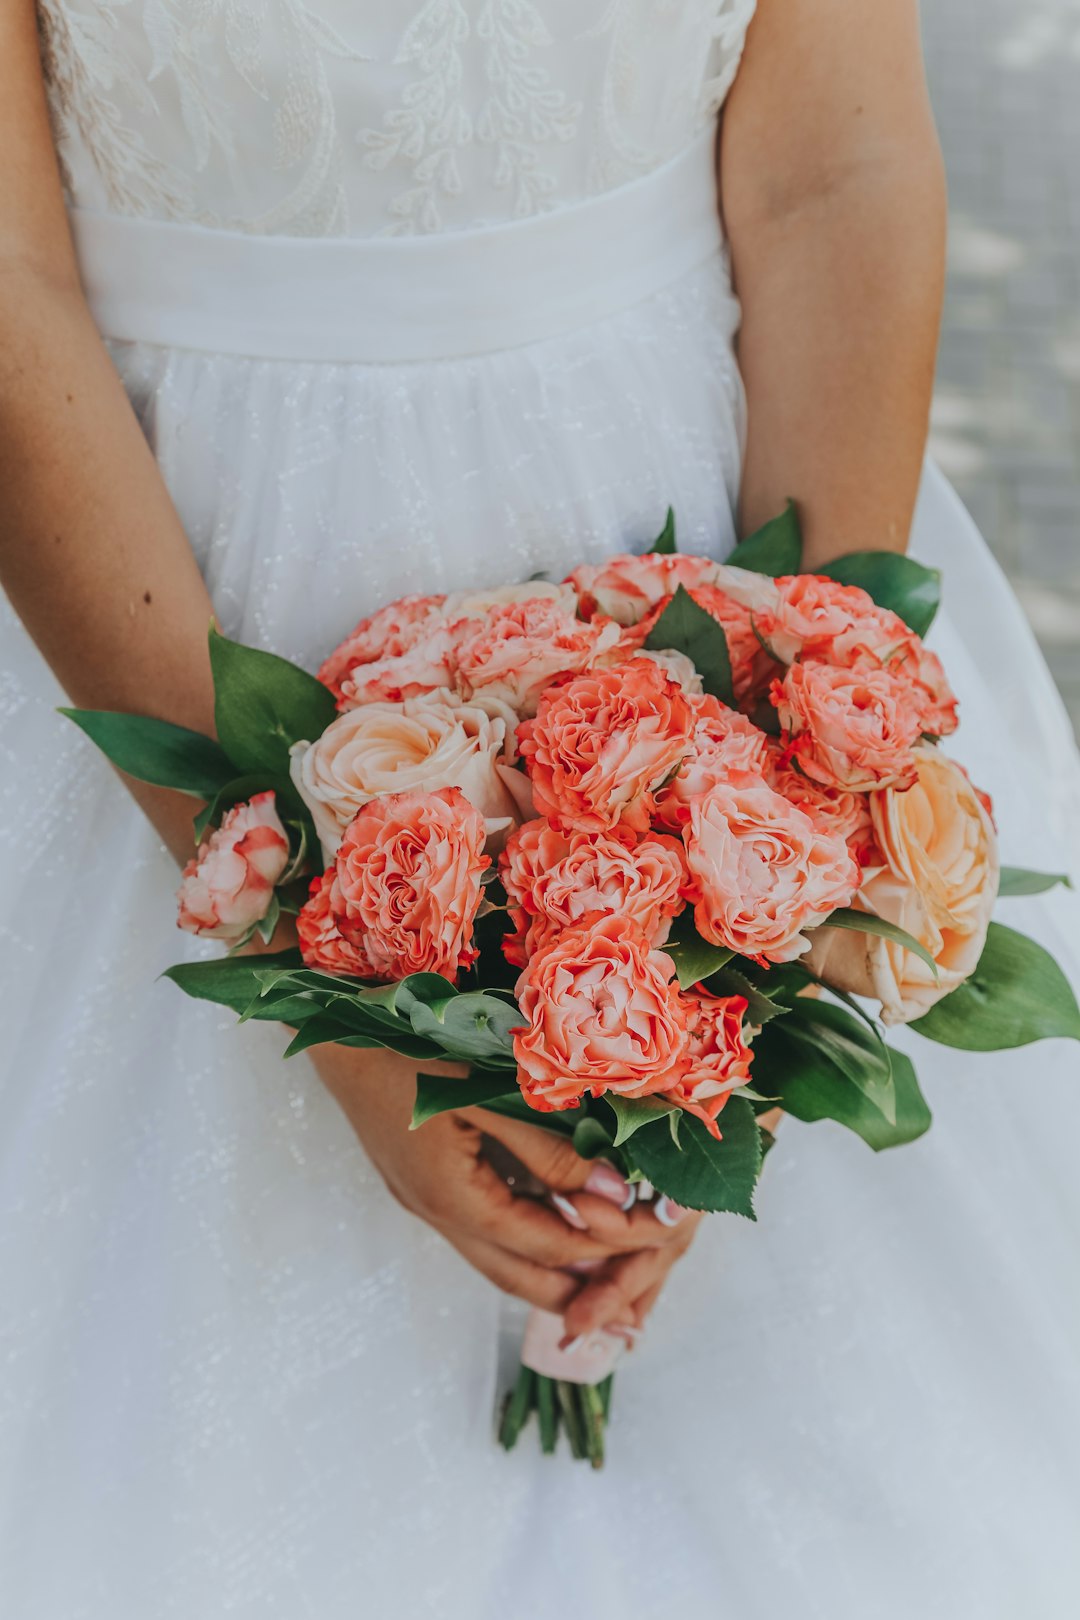 woman in white dress holding red rose bouquet